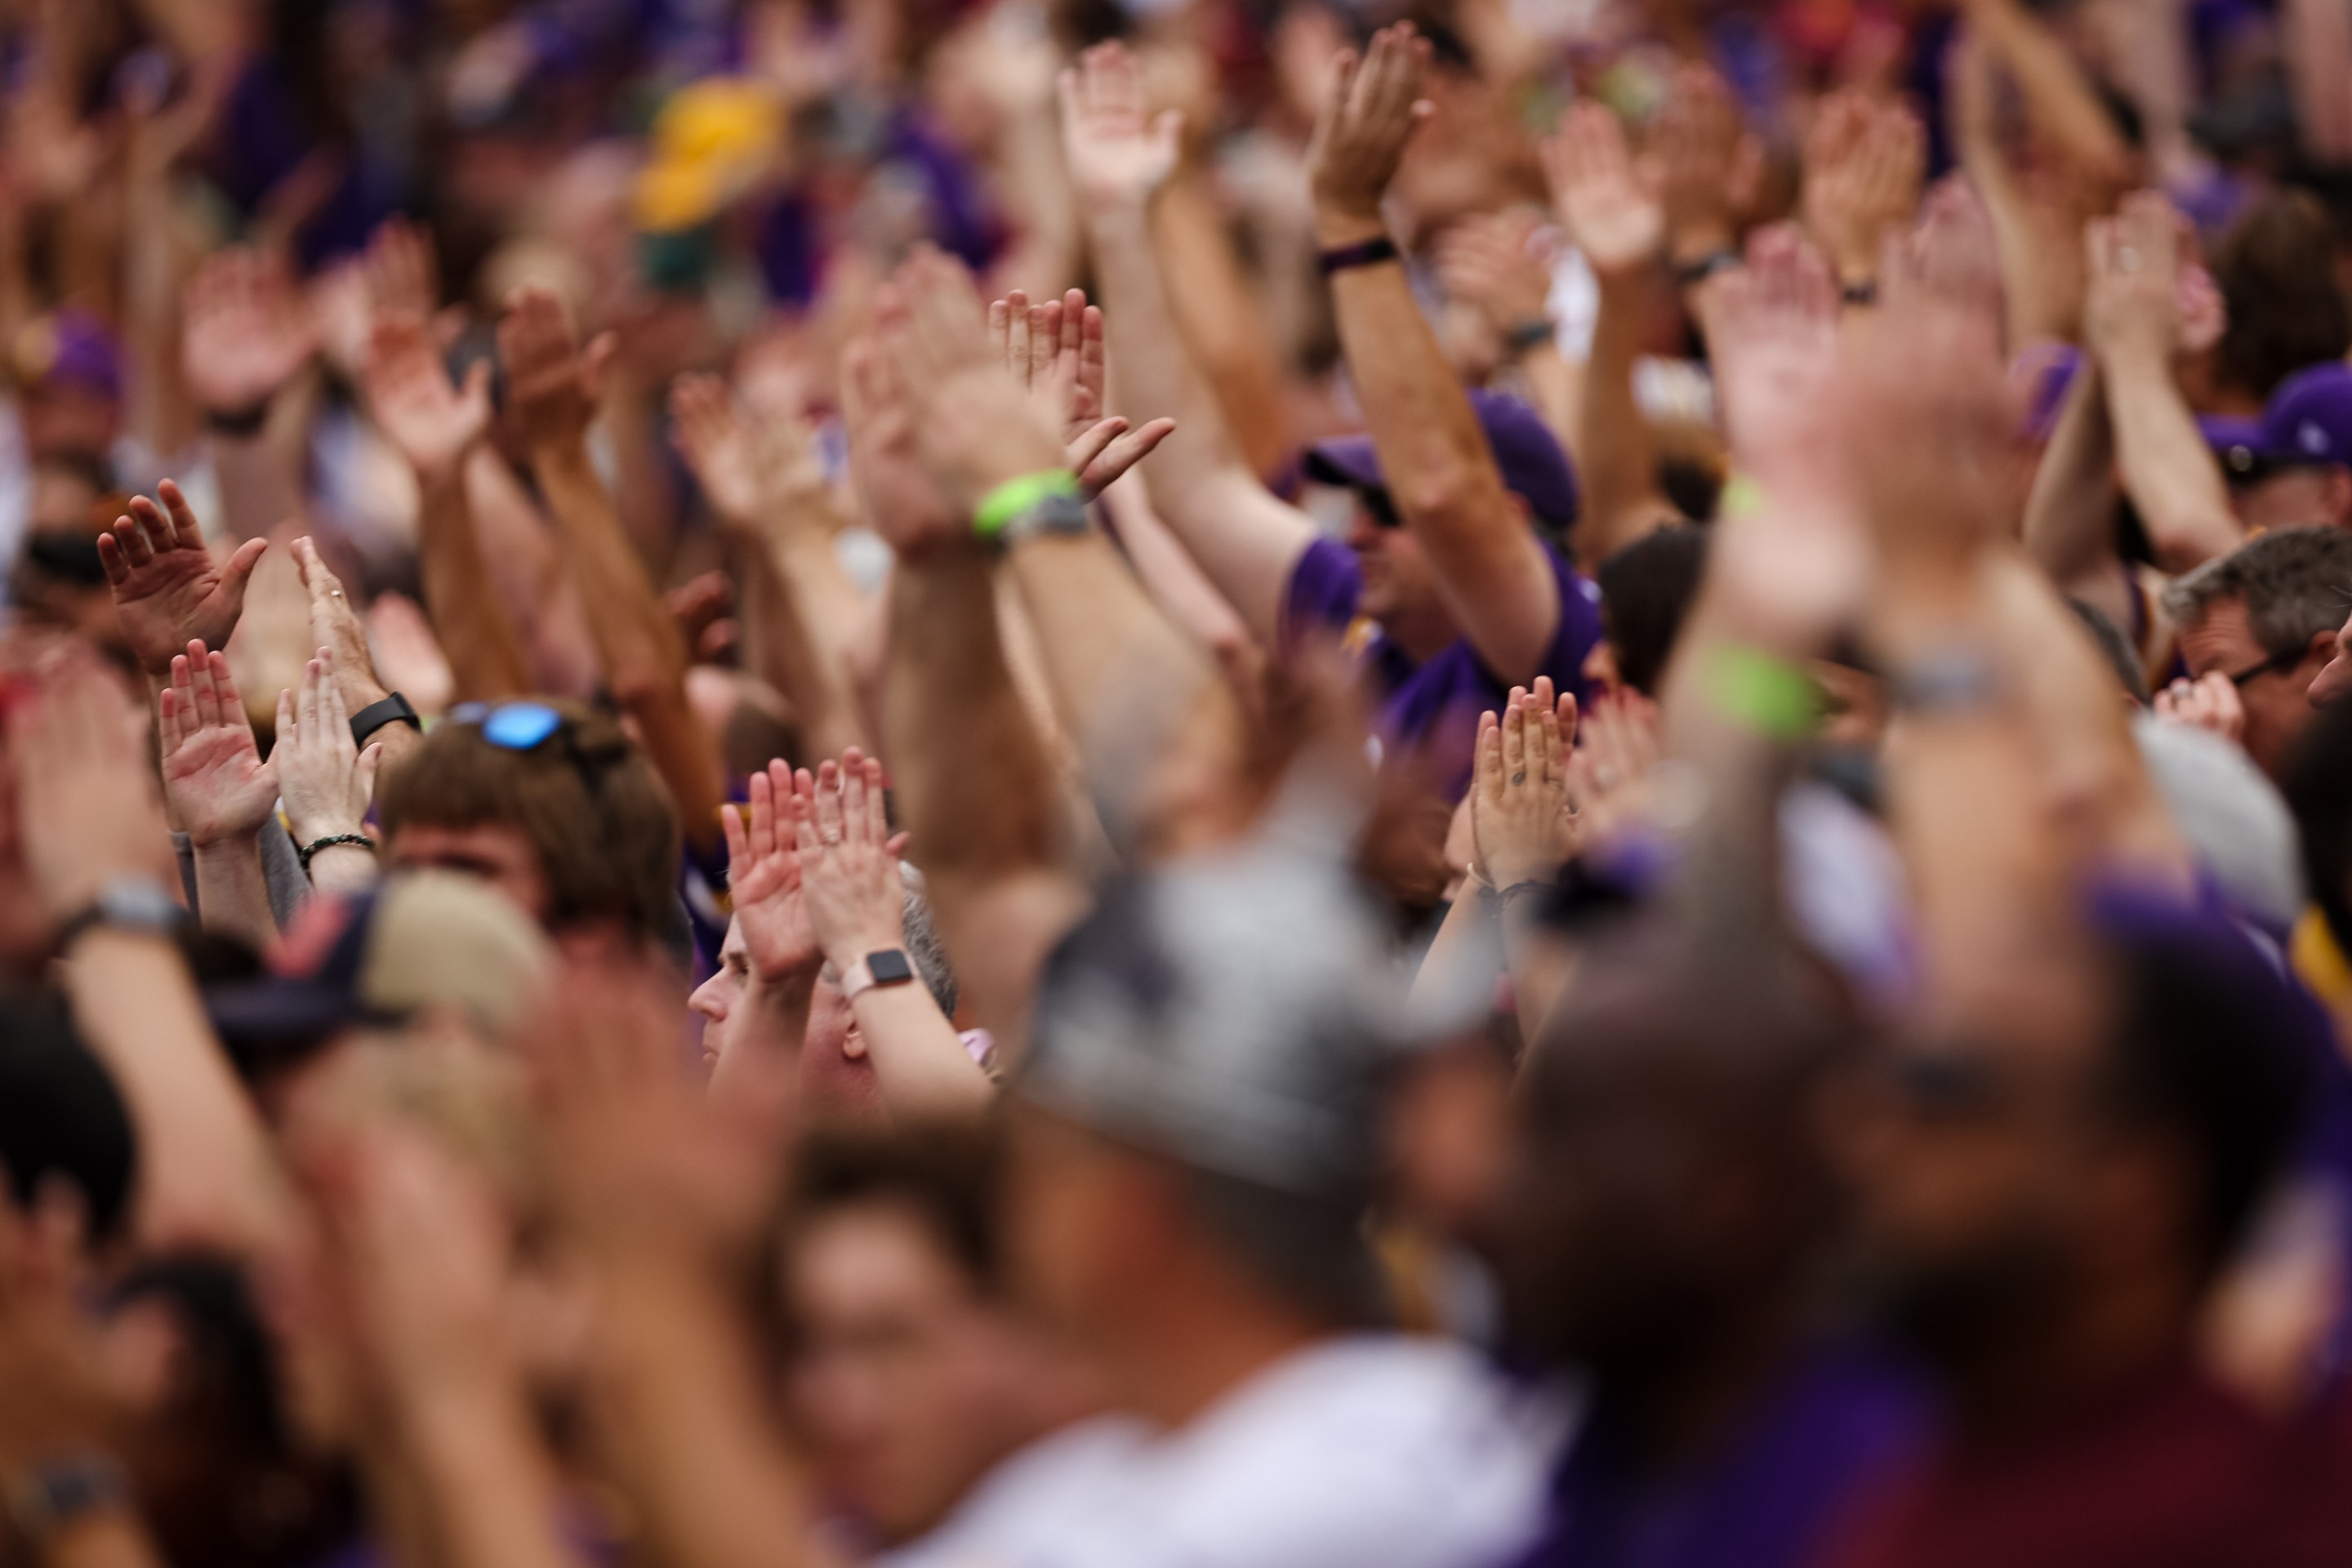 LANDOVER, MD - NOVEMBER 06: Fans clap for the Minnesota Vikings during the game against the Washington Commanders at FedExField on November 6, 2022 in Landover, Maryland. (Photo by Scott Taetsch/Getty Images)